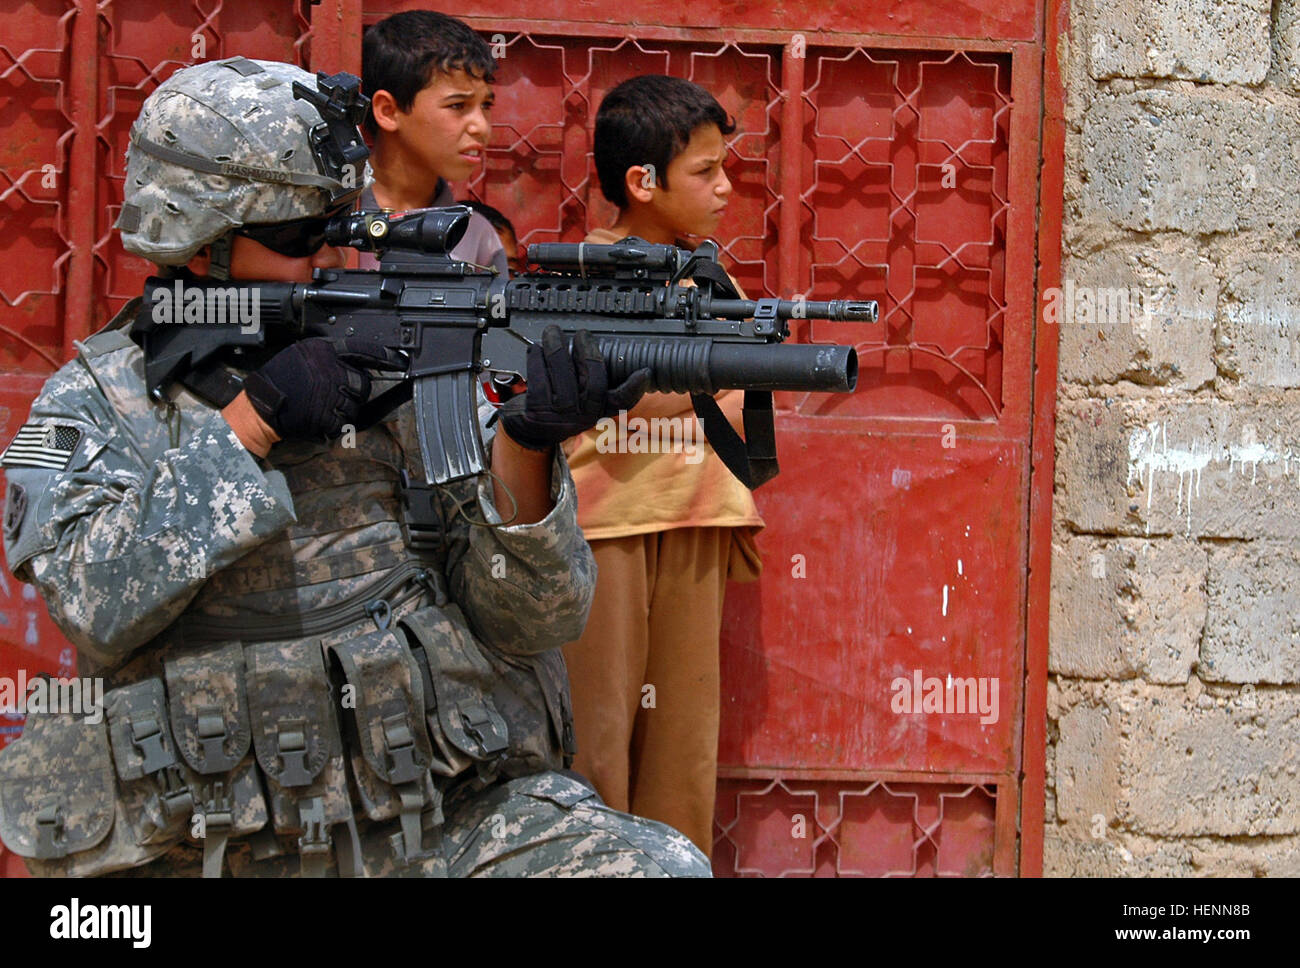 As Iraqi children peek out their front gate Spc. Vencent Hashimoto, an infantryman in 1st Platoon, Company D, 1st Battalion, 8th Infantry Regiment from Fort Carson, Colo., scans his surroundings during a combat patrol in  Mosul, Iraq, on April 12. Infantry Soldiers recon Mosul 84770 Stock Photo